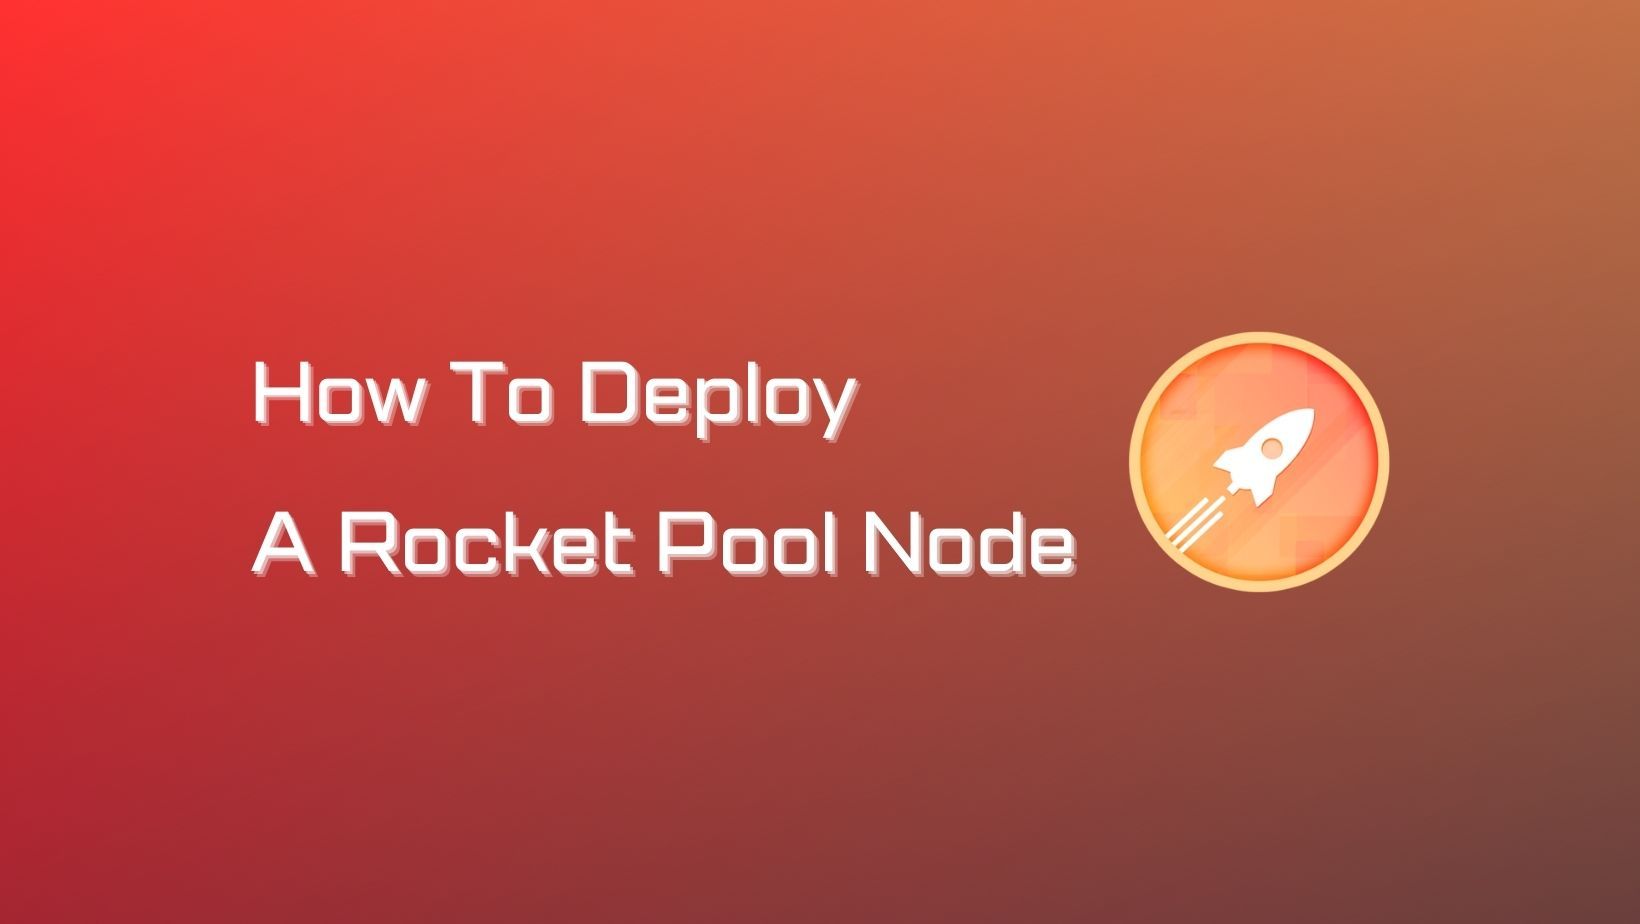 How To Deploy A Rocket Pool Node on Linux